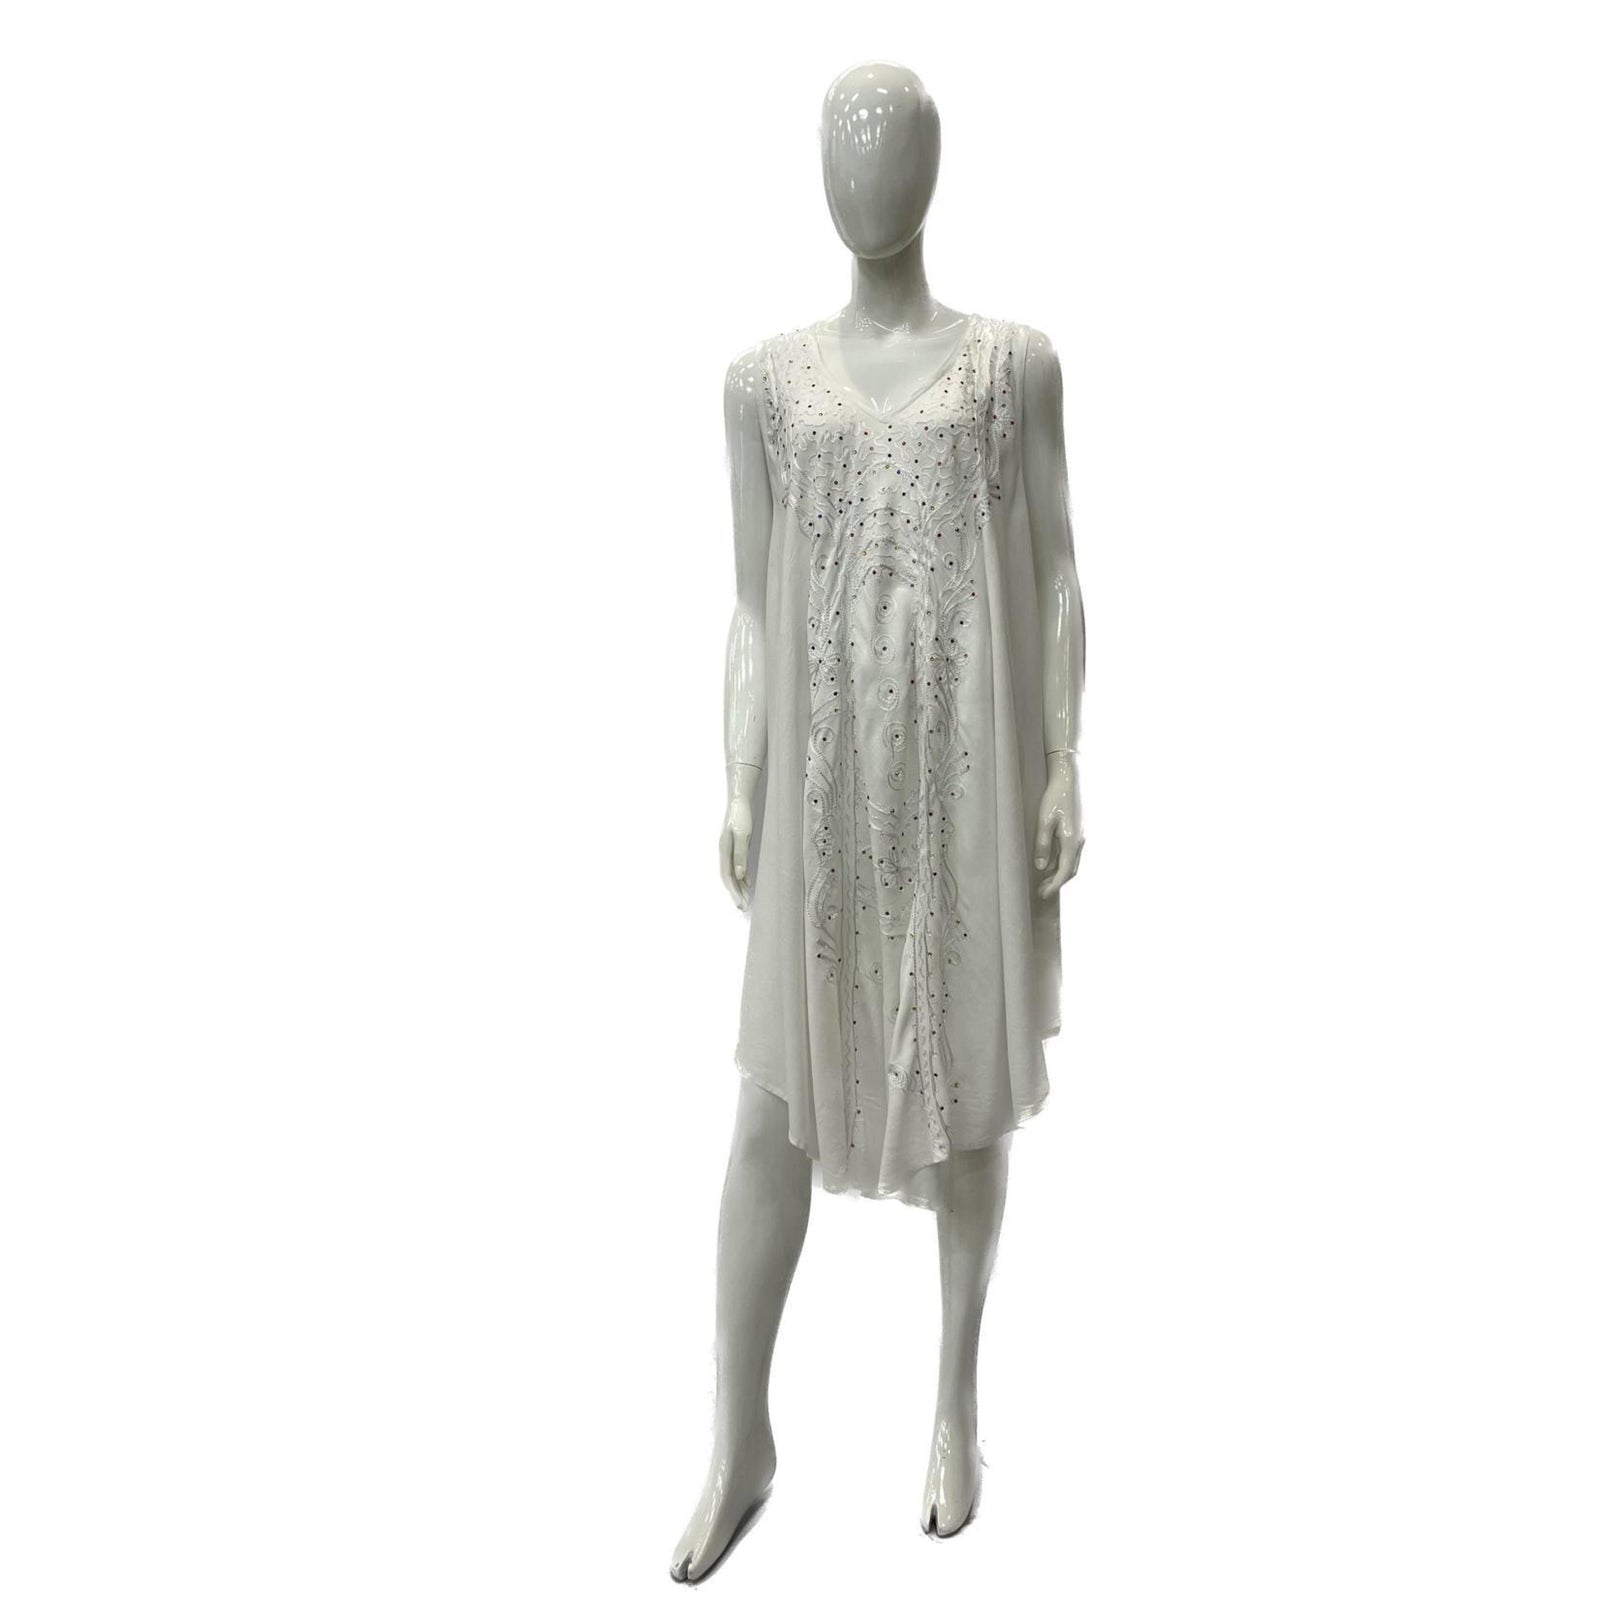 Wholesale Women's Dresses Rayon Solid White with Embedded Sl U Gown 6-48 Case O-S 140Gms 1C Milana NWr5